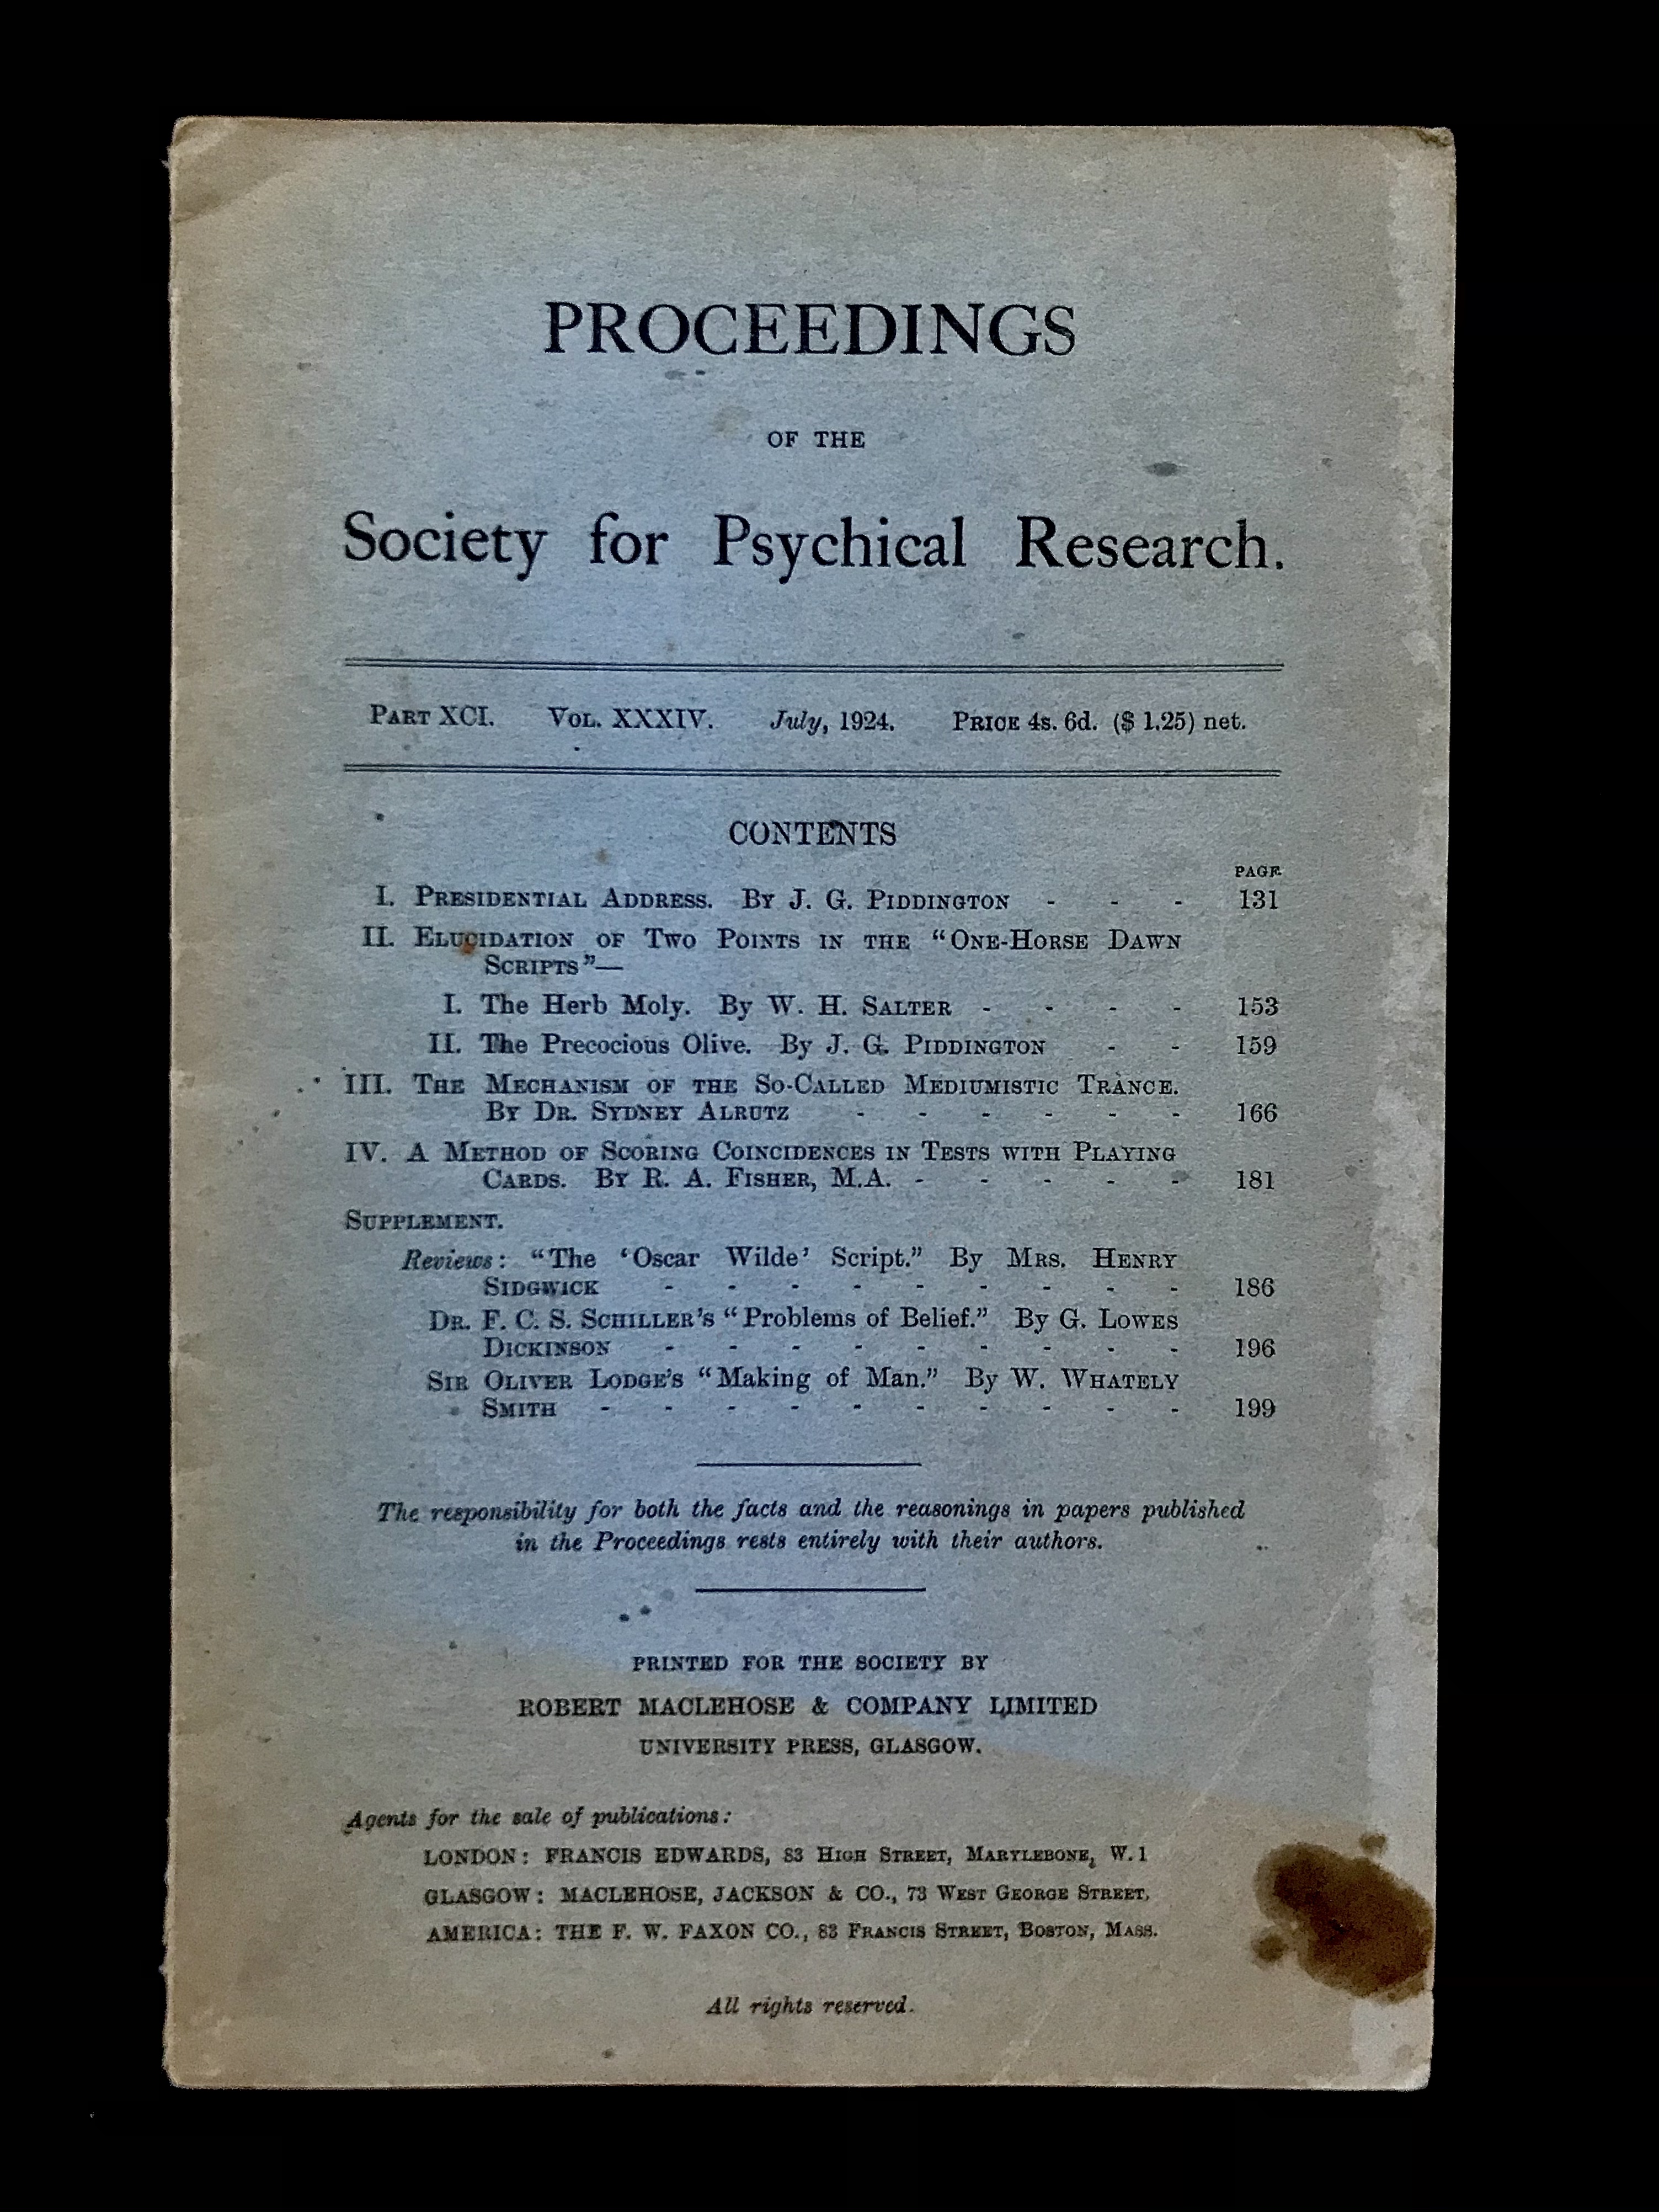 Proceedings of the Society for Psychical Research Vol. XXXIV